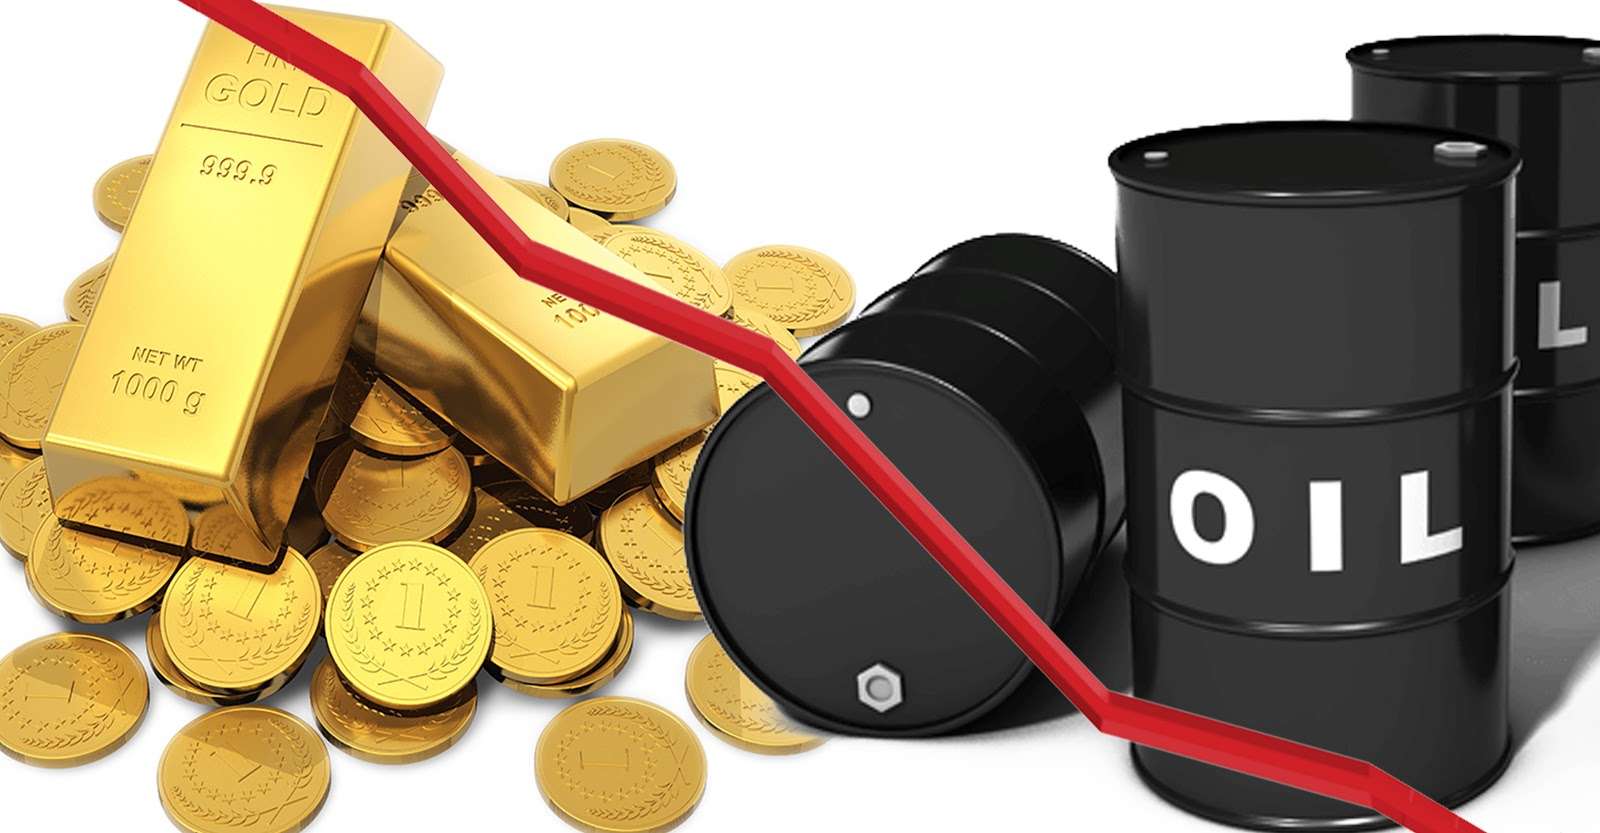 An assessment of the Gold For Oil Programme: A Position Paper